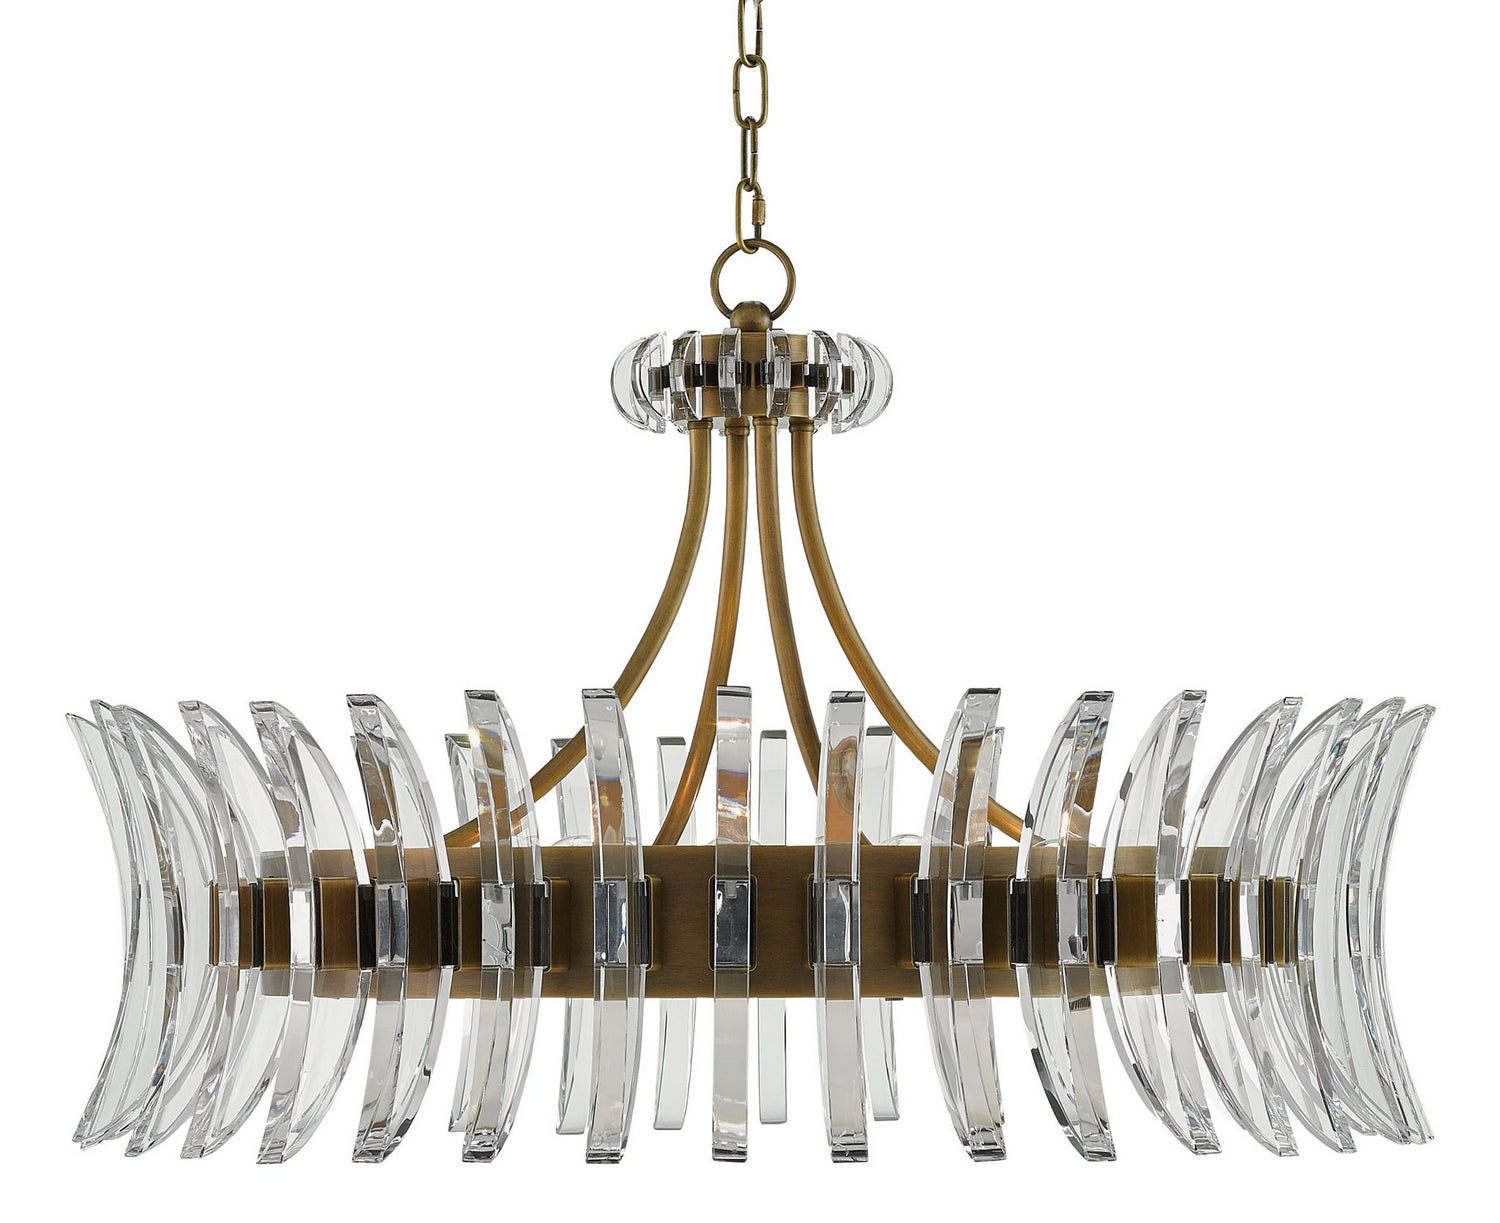 Eight Light Chandelier from the Coquette collection in Antique Brass finish